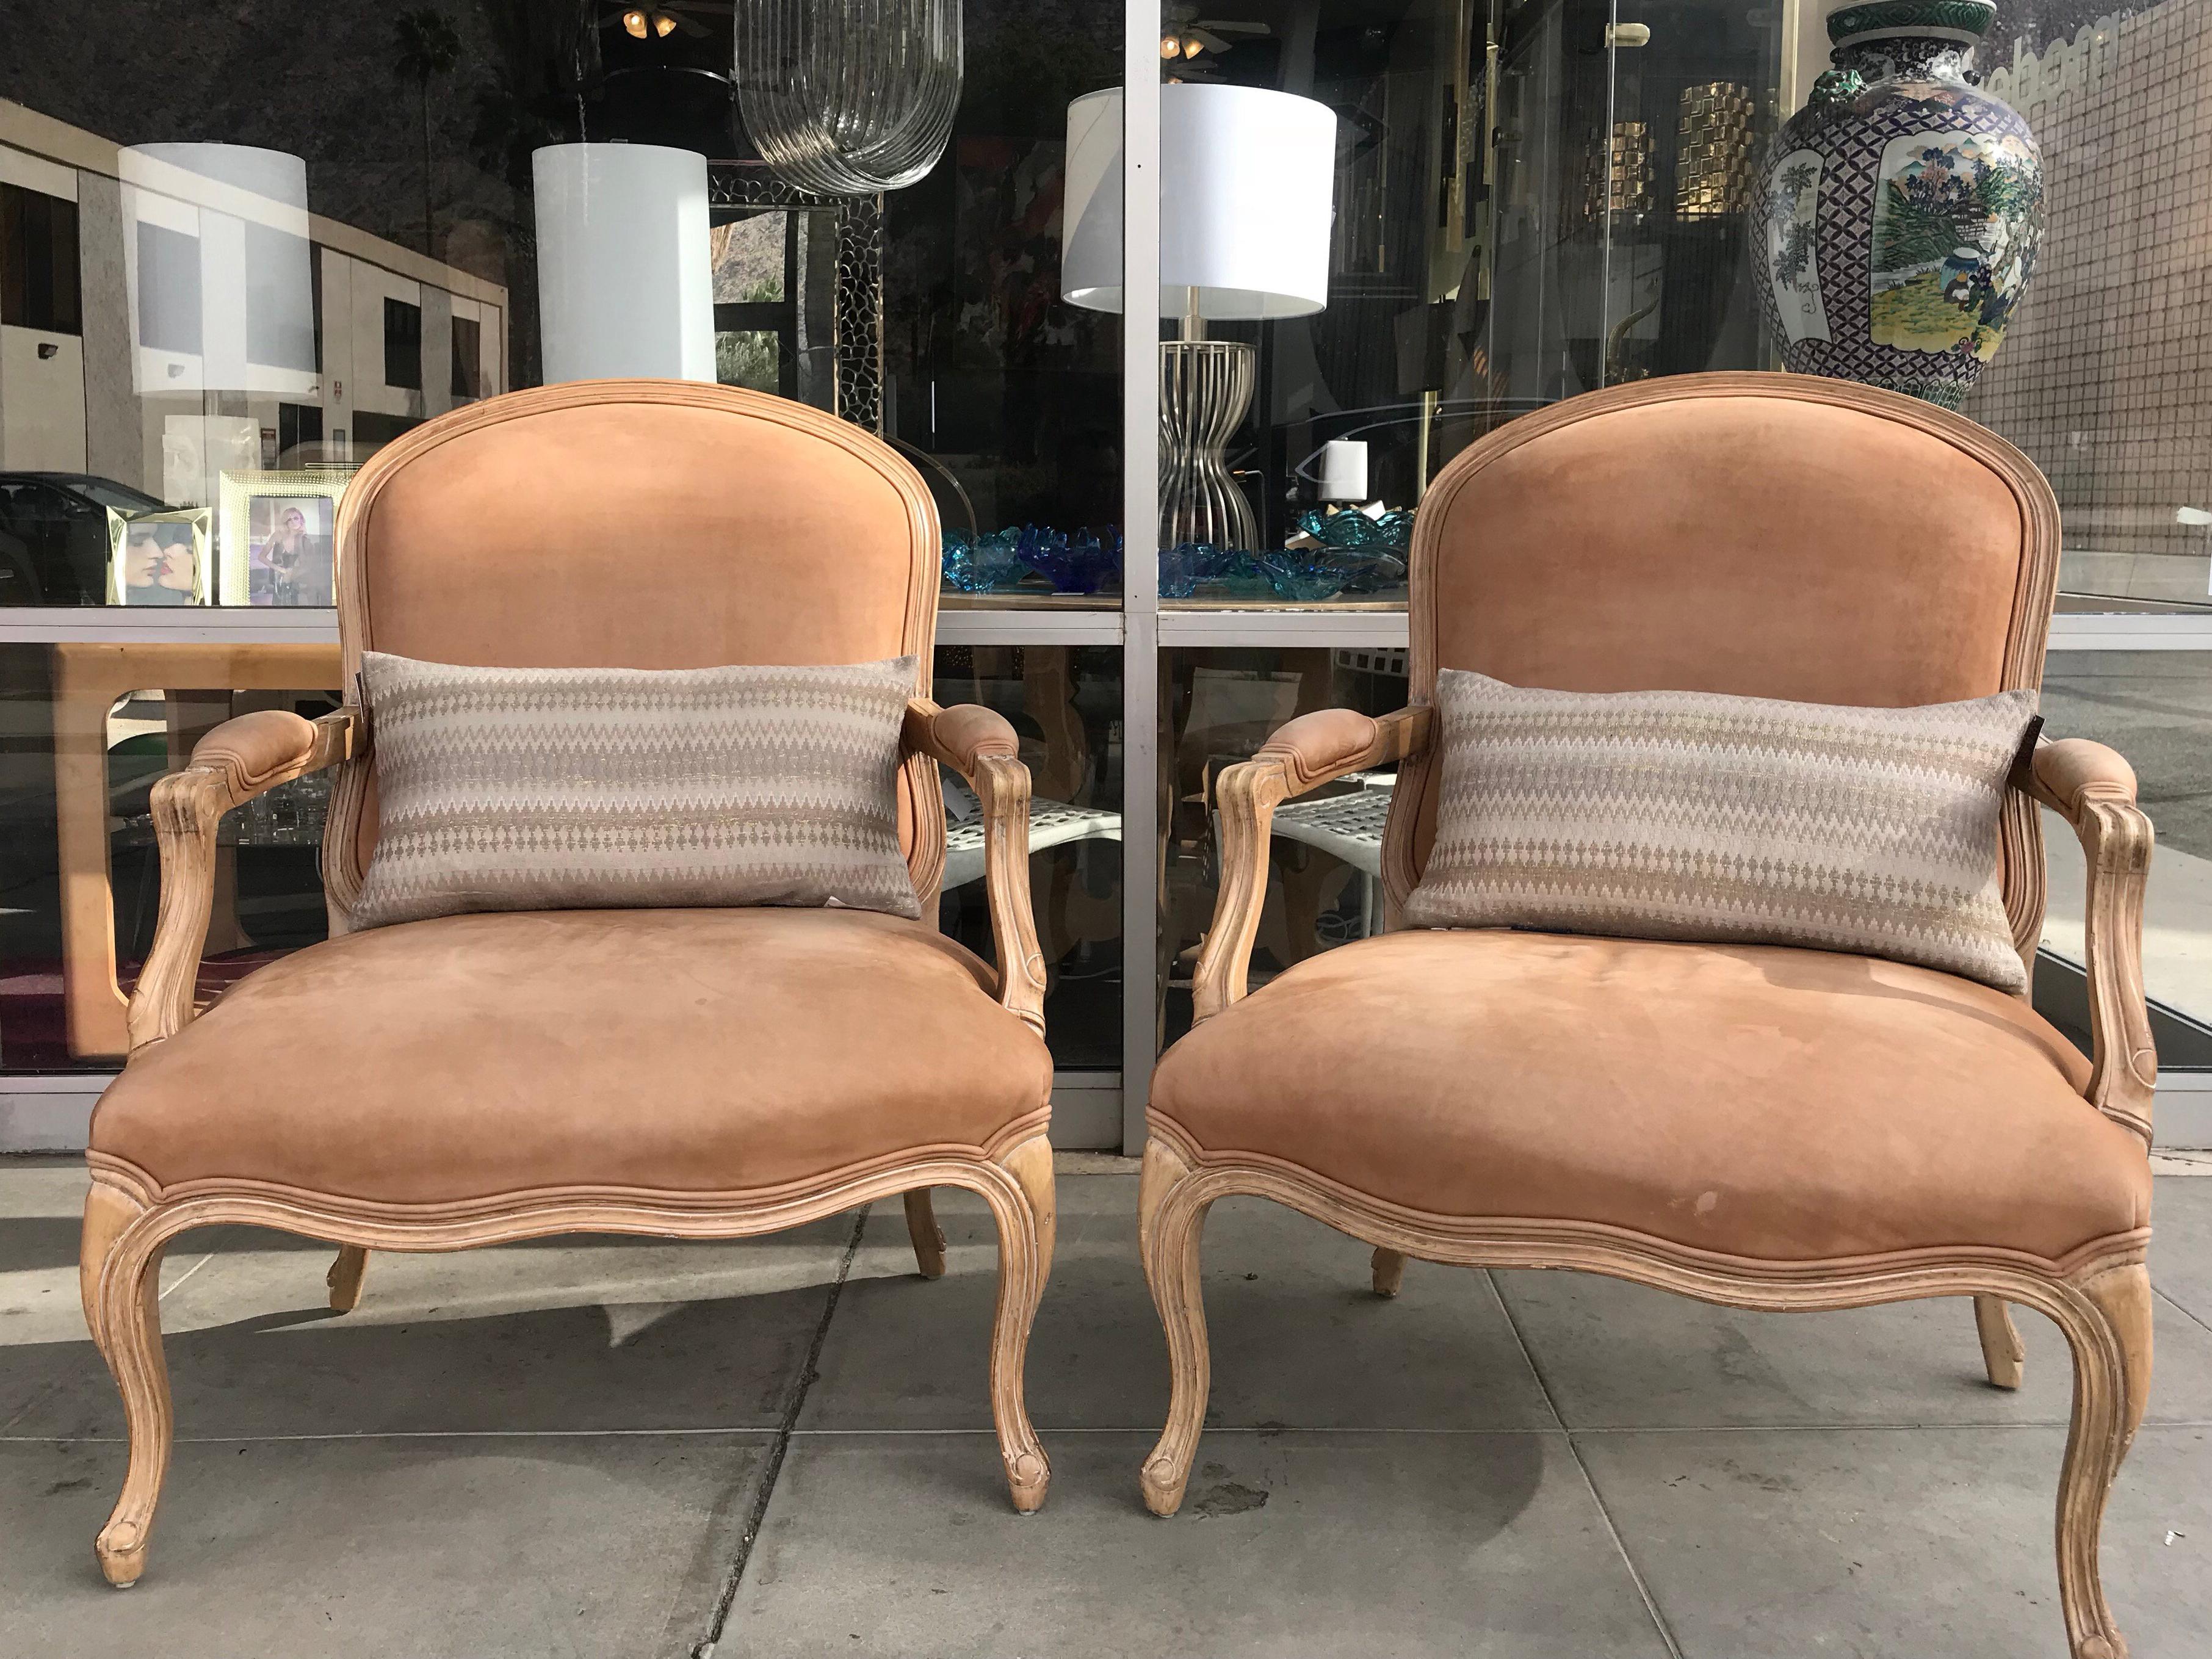 A very chic pair of Bergere chairs made by Kreiss in the late 1980s for a Palm Springs Country Club Estate. In very modern light wood with antique painted finish. The chairs are in the largest 'living room